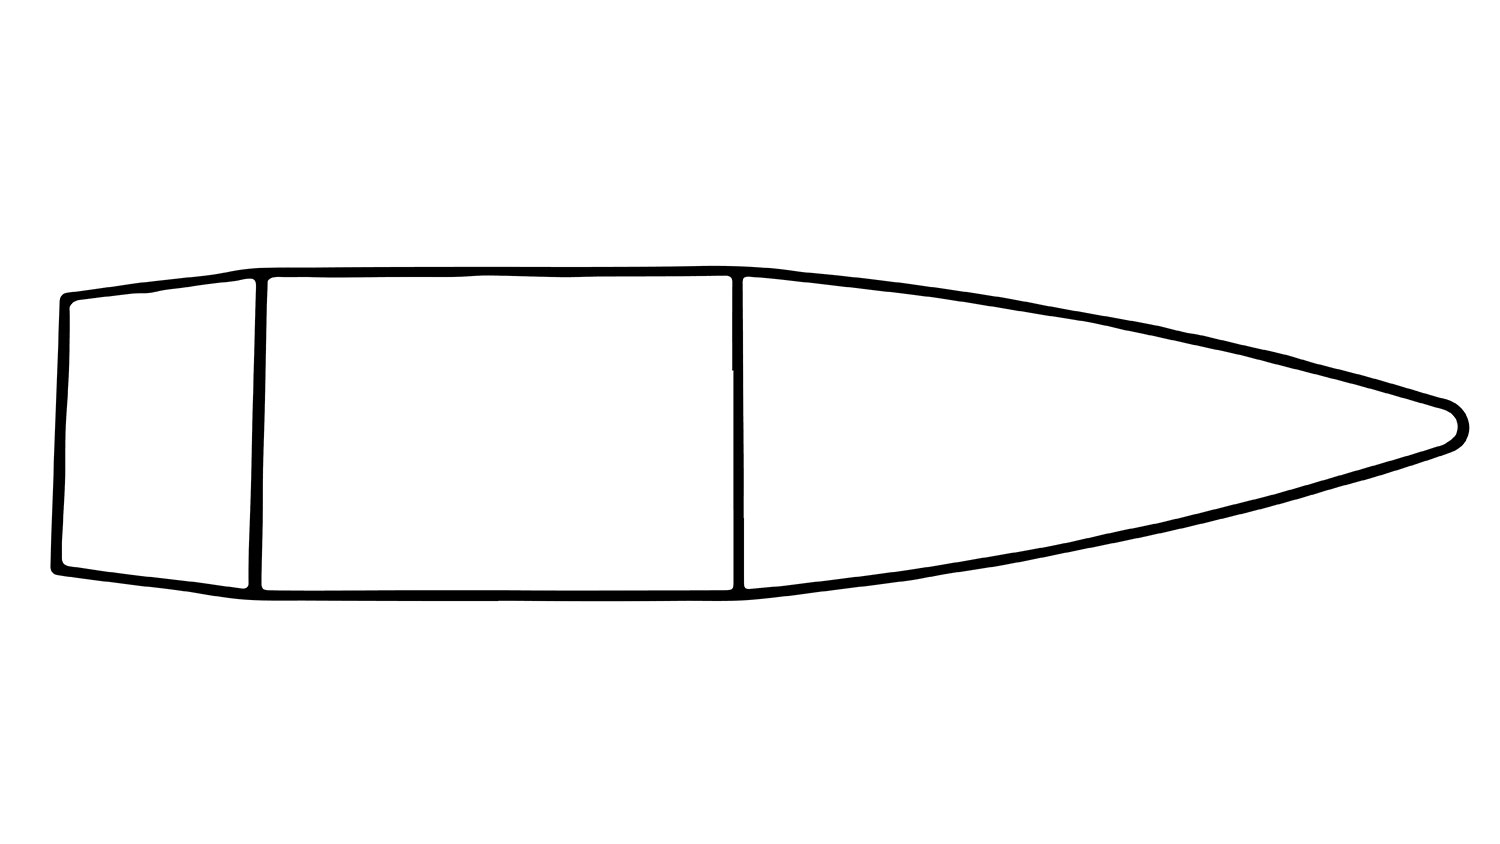 G7 Standard Projectile